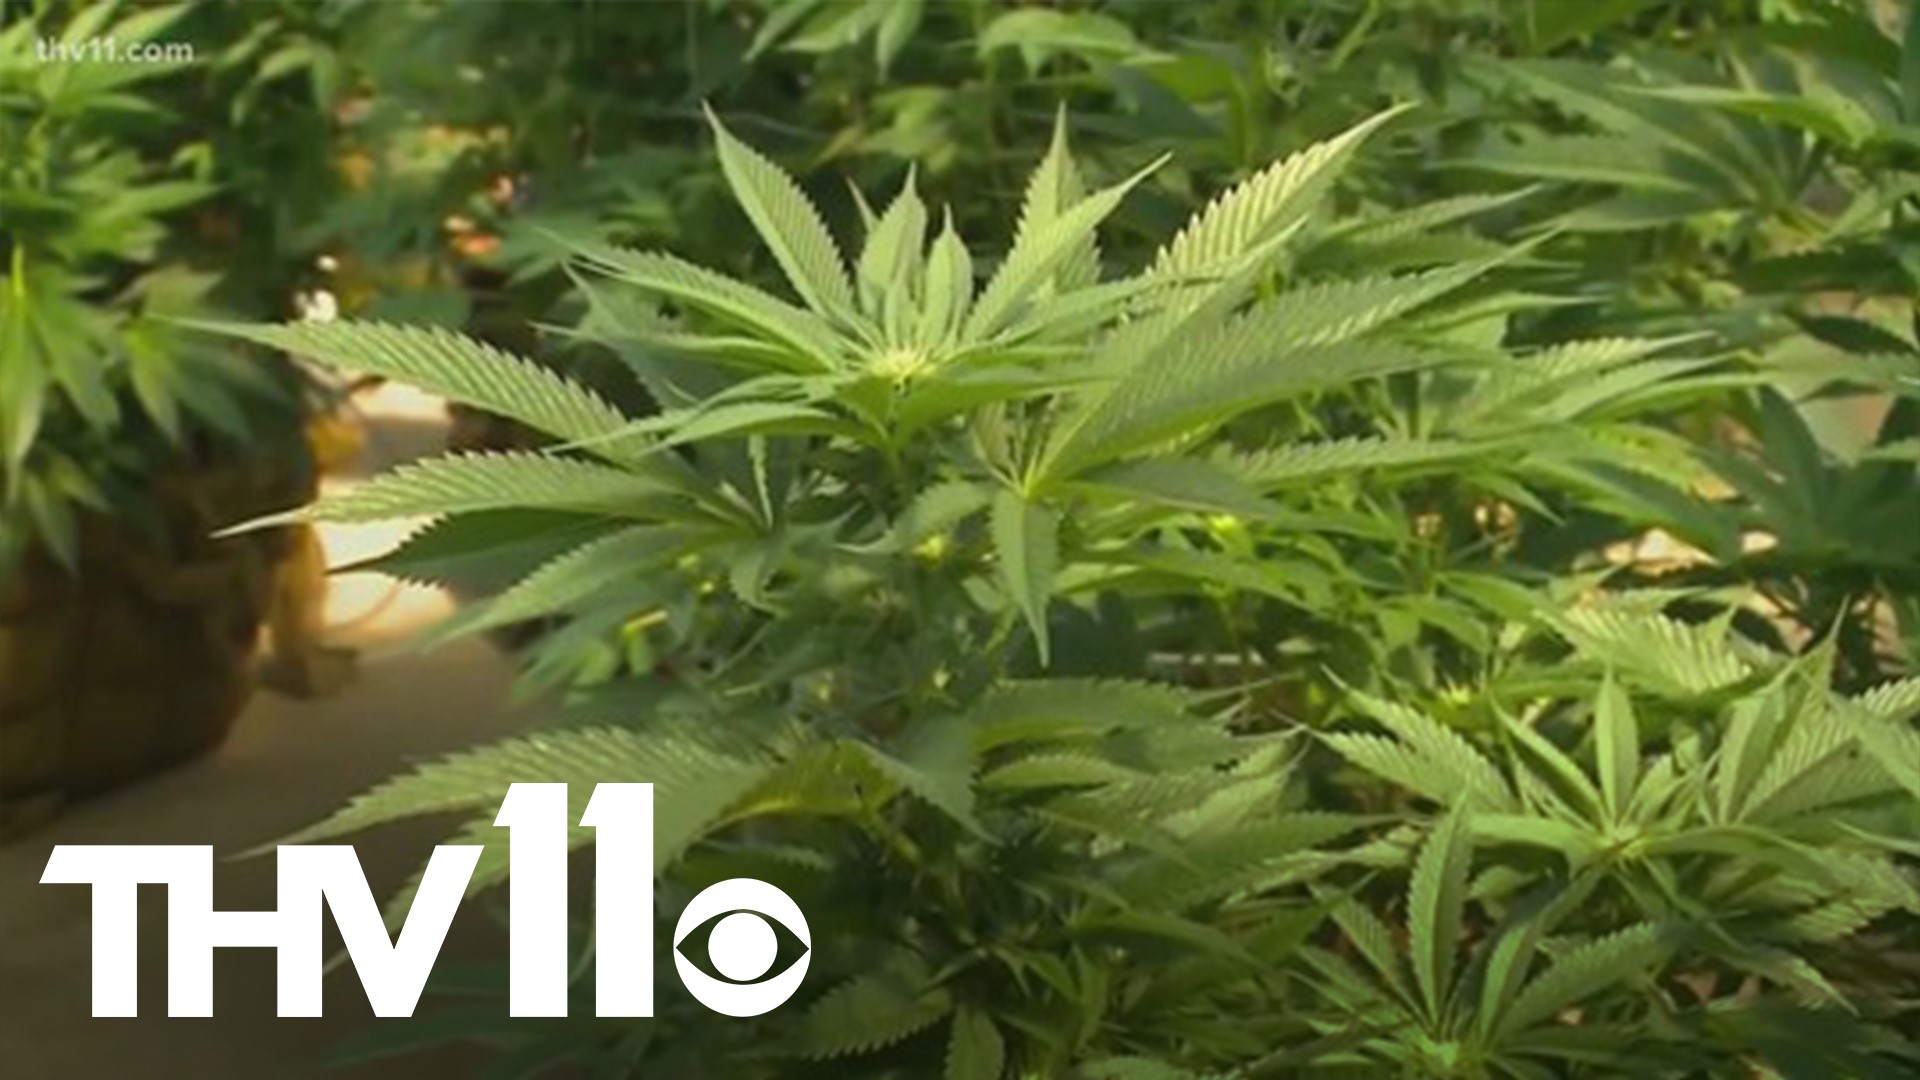 Gov. Hutchinson voiced his opposition to the legalization of recreational marijuana in Arkansas, and now we go more in-depth on what that means.